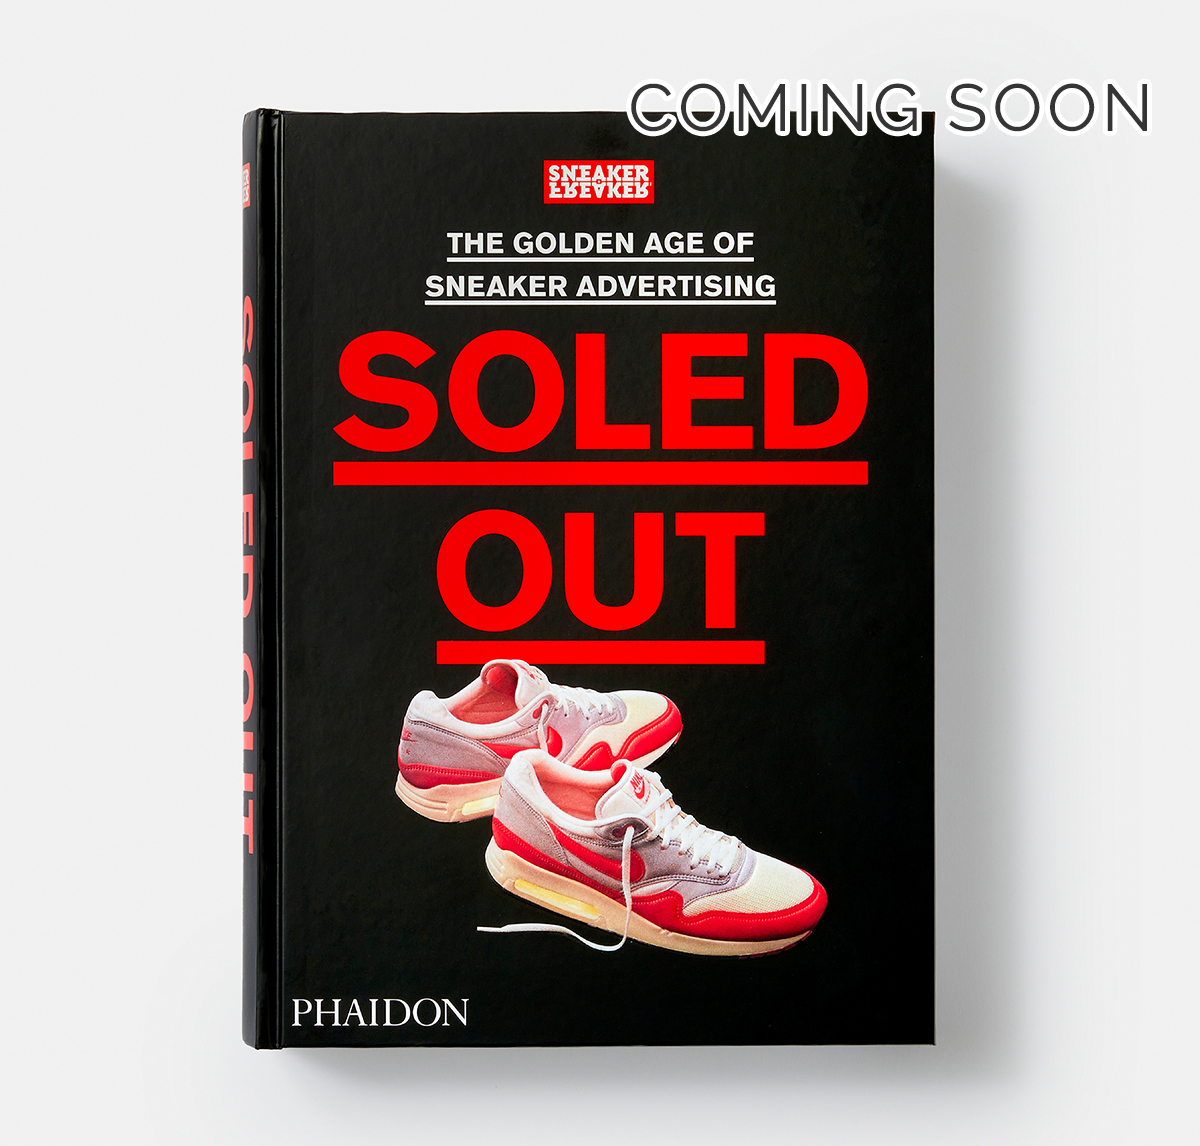 Sneaker Freaker Soled Out - The Golden Age of Sneaker Advertising soon